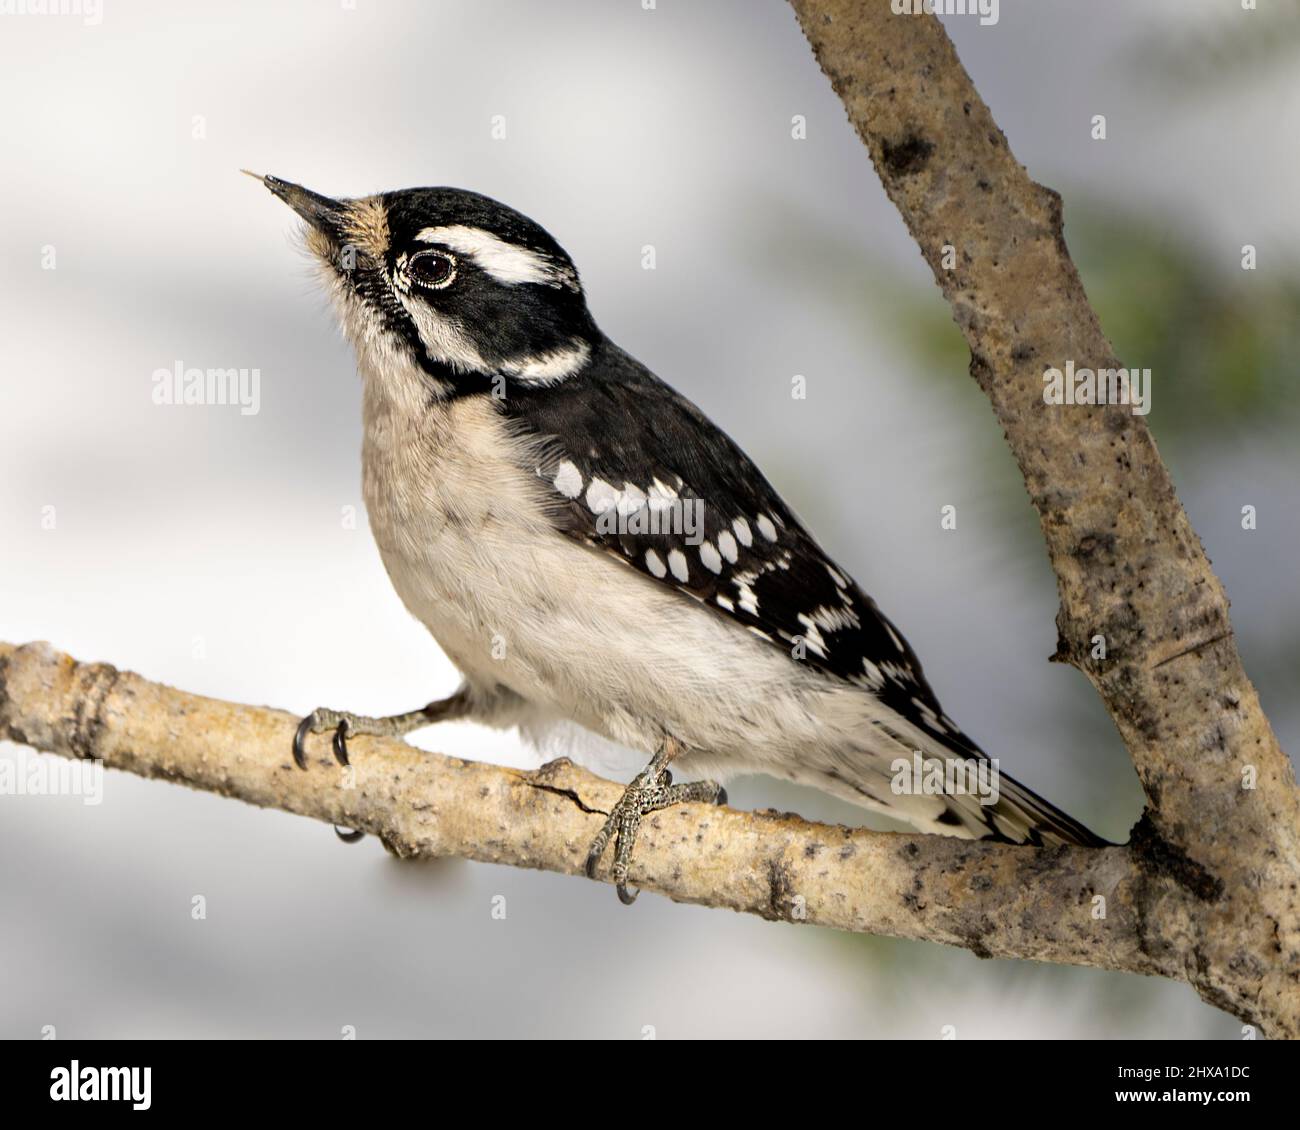 Woodpecker Downy female on a tree branch with a white background in its environment and habitat surrounding displaying white and black feather plumage Stock Photo